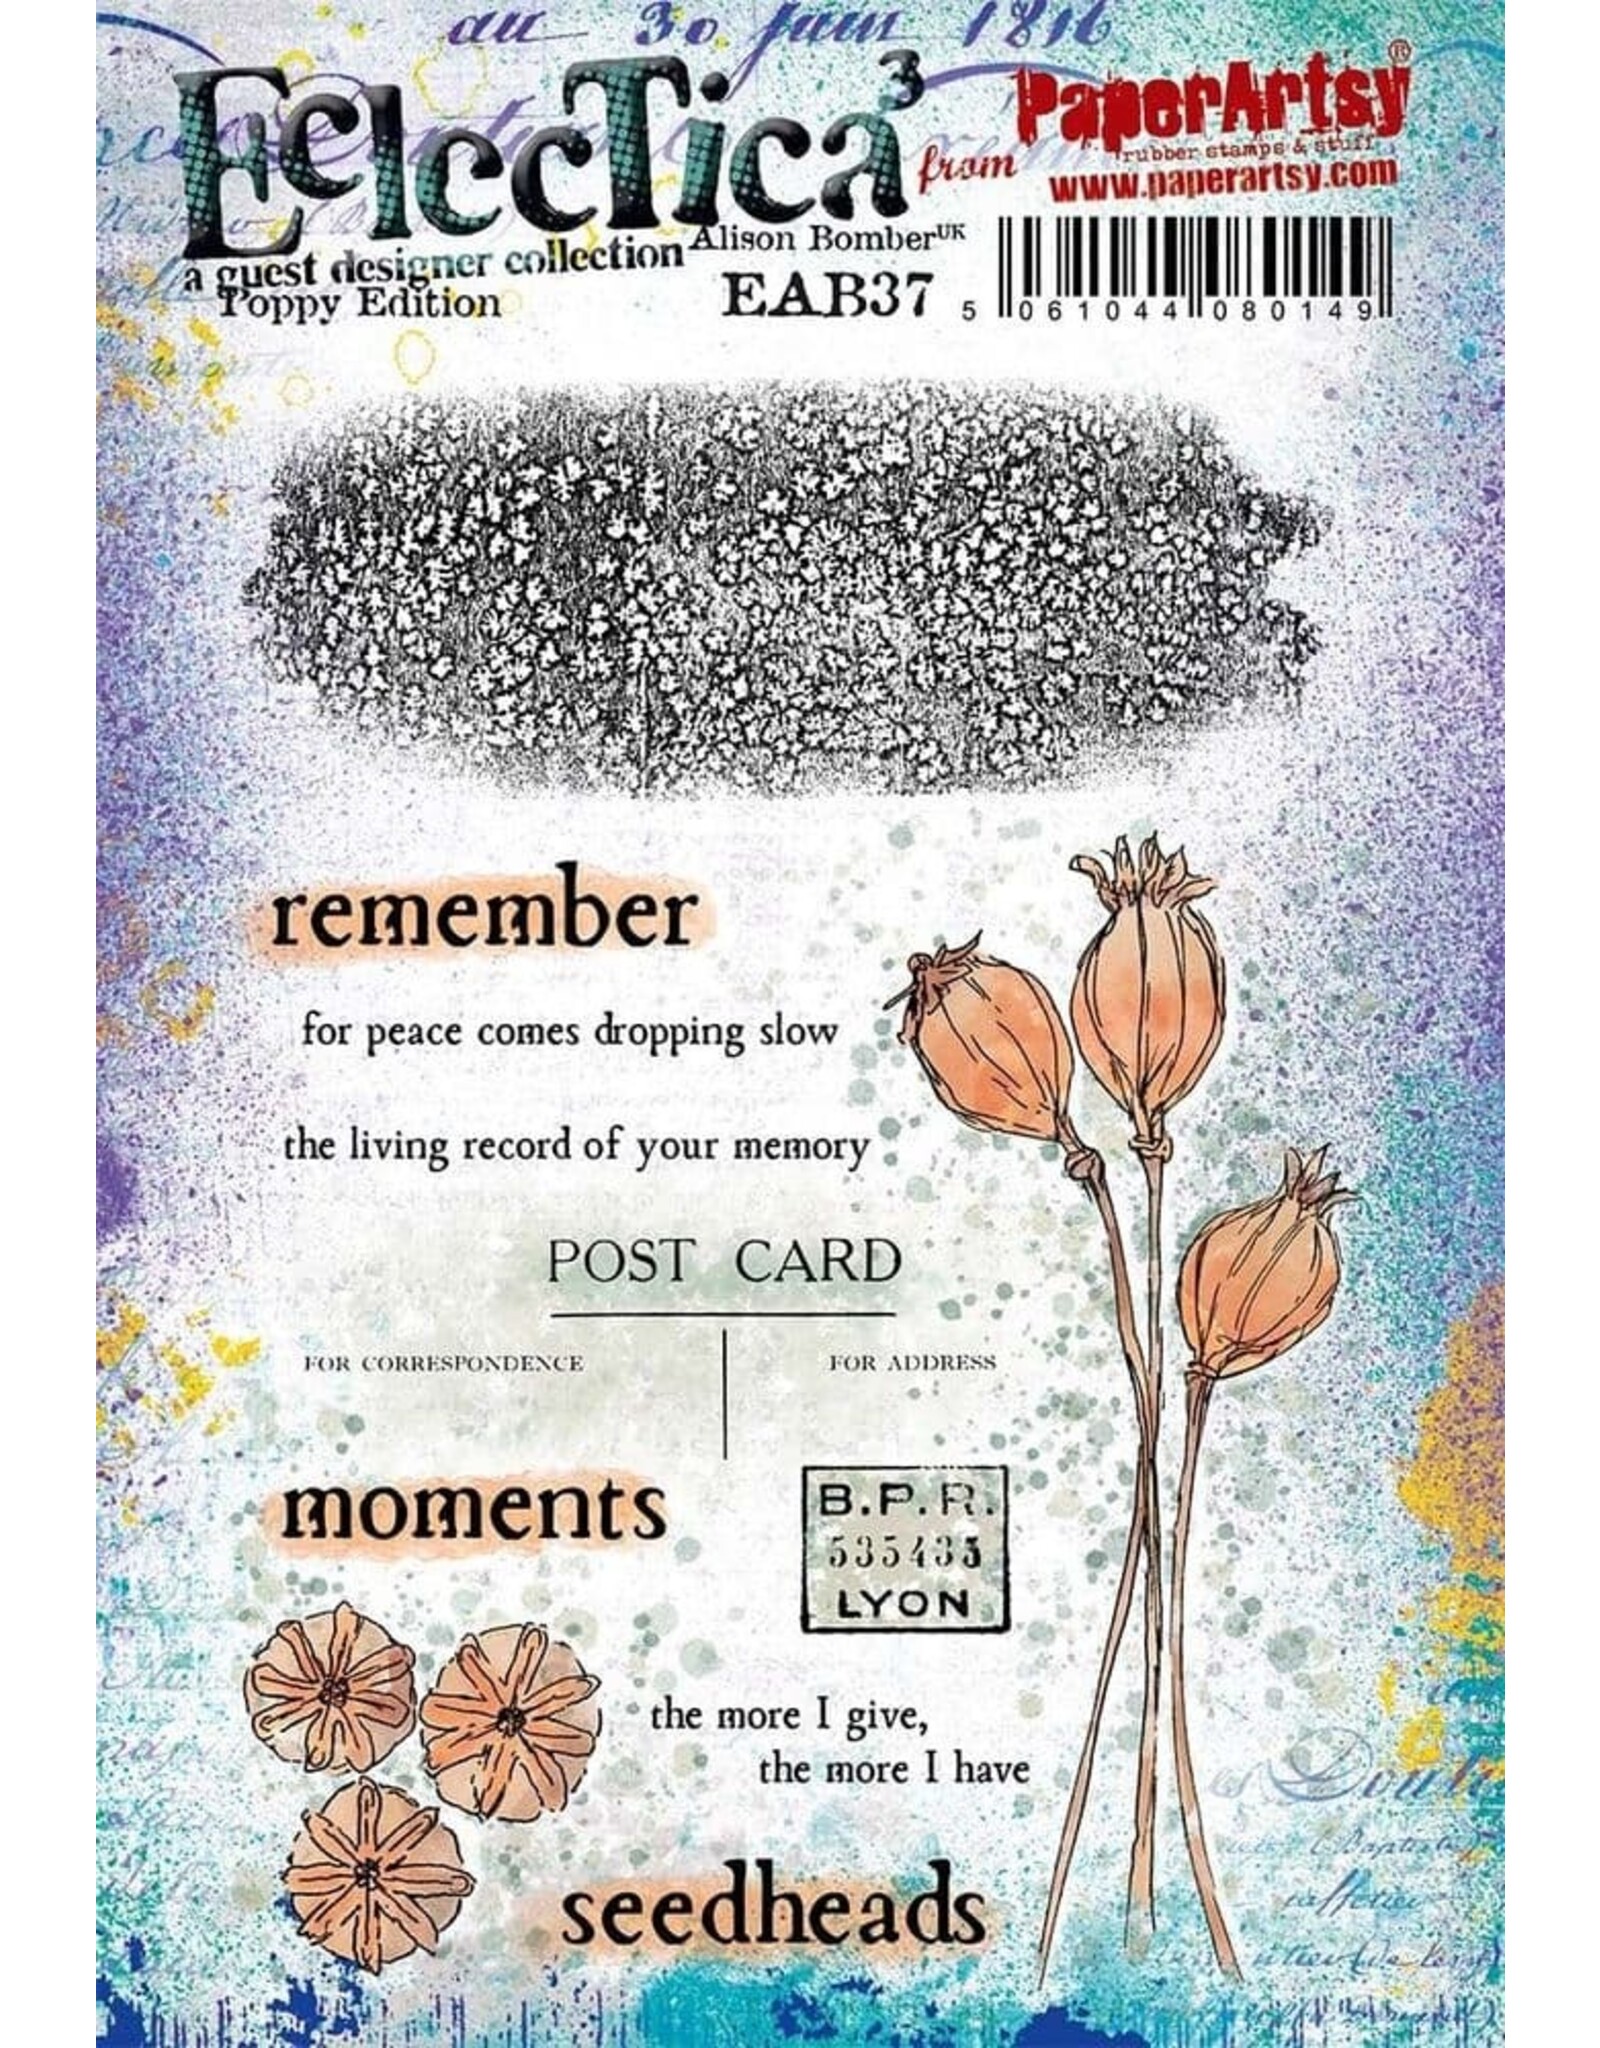 PAPER ARTSY PAPER ARTSY ECLECTICA ALISON BOMBER POPPY EDITION EAB38 CLING STAMP SET